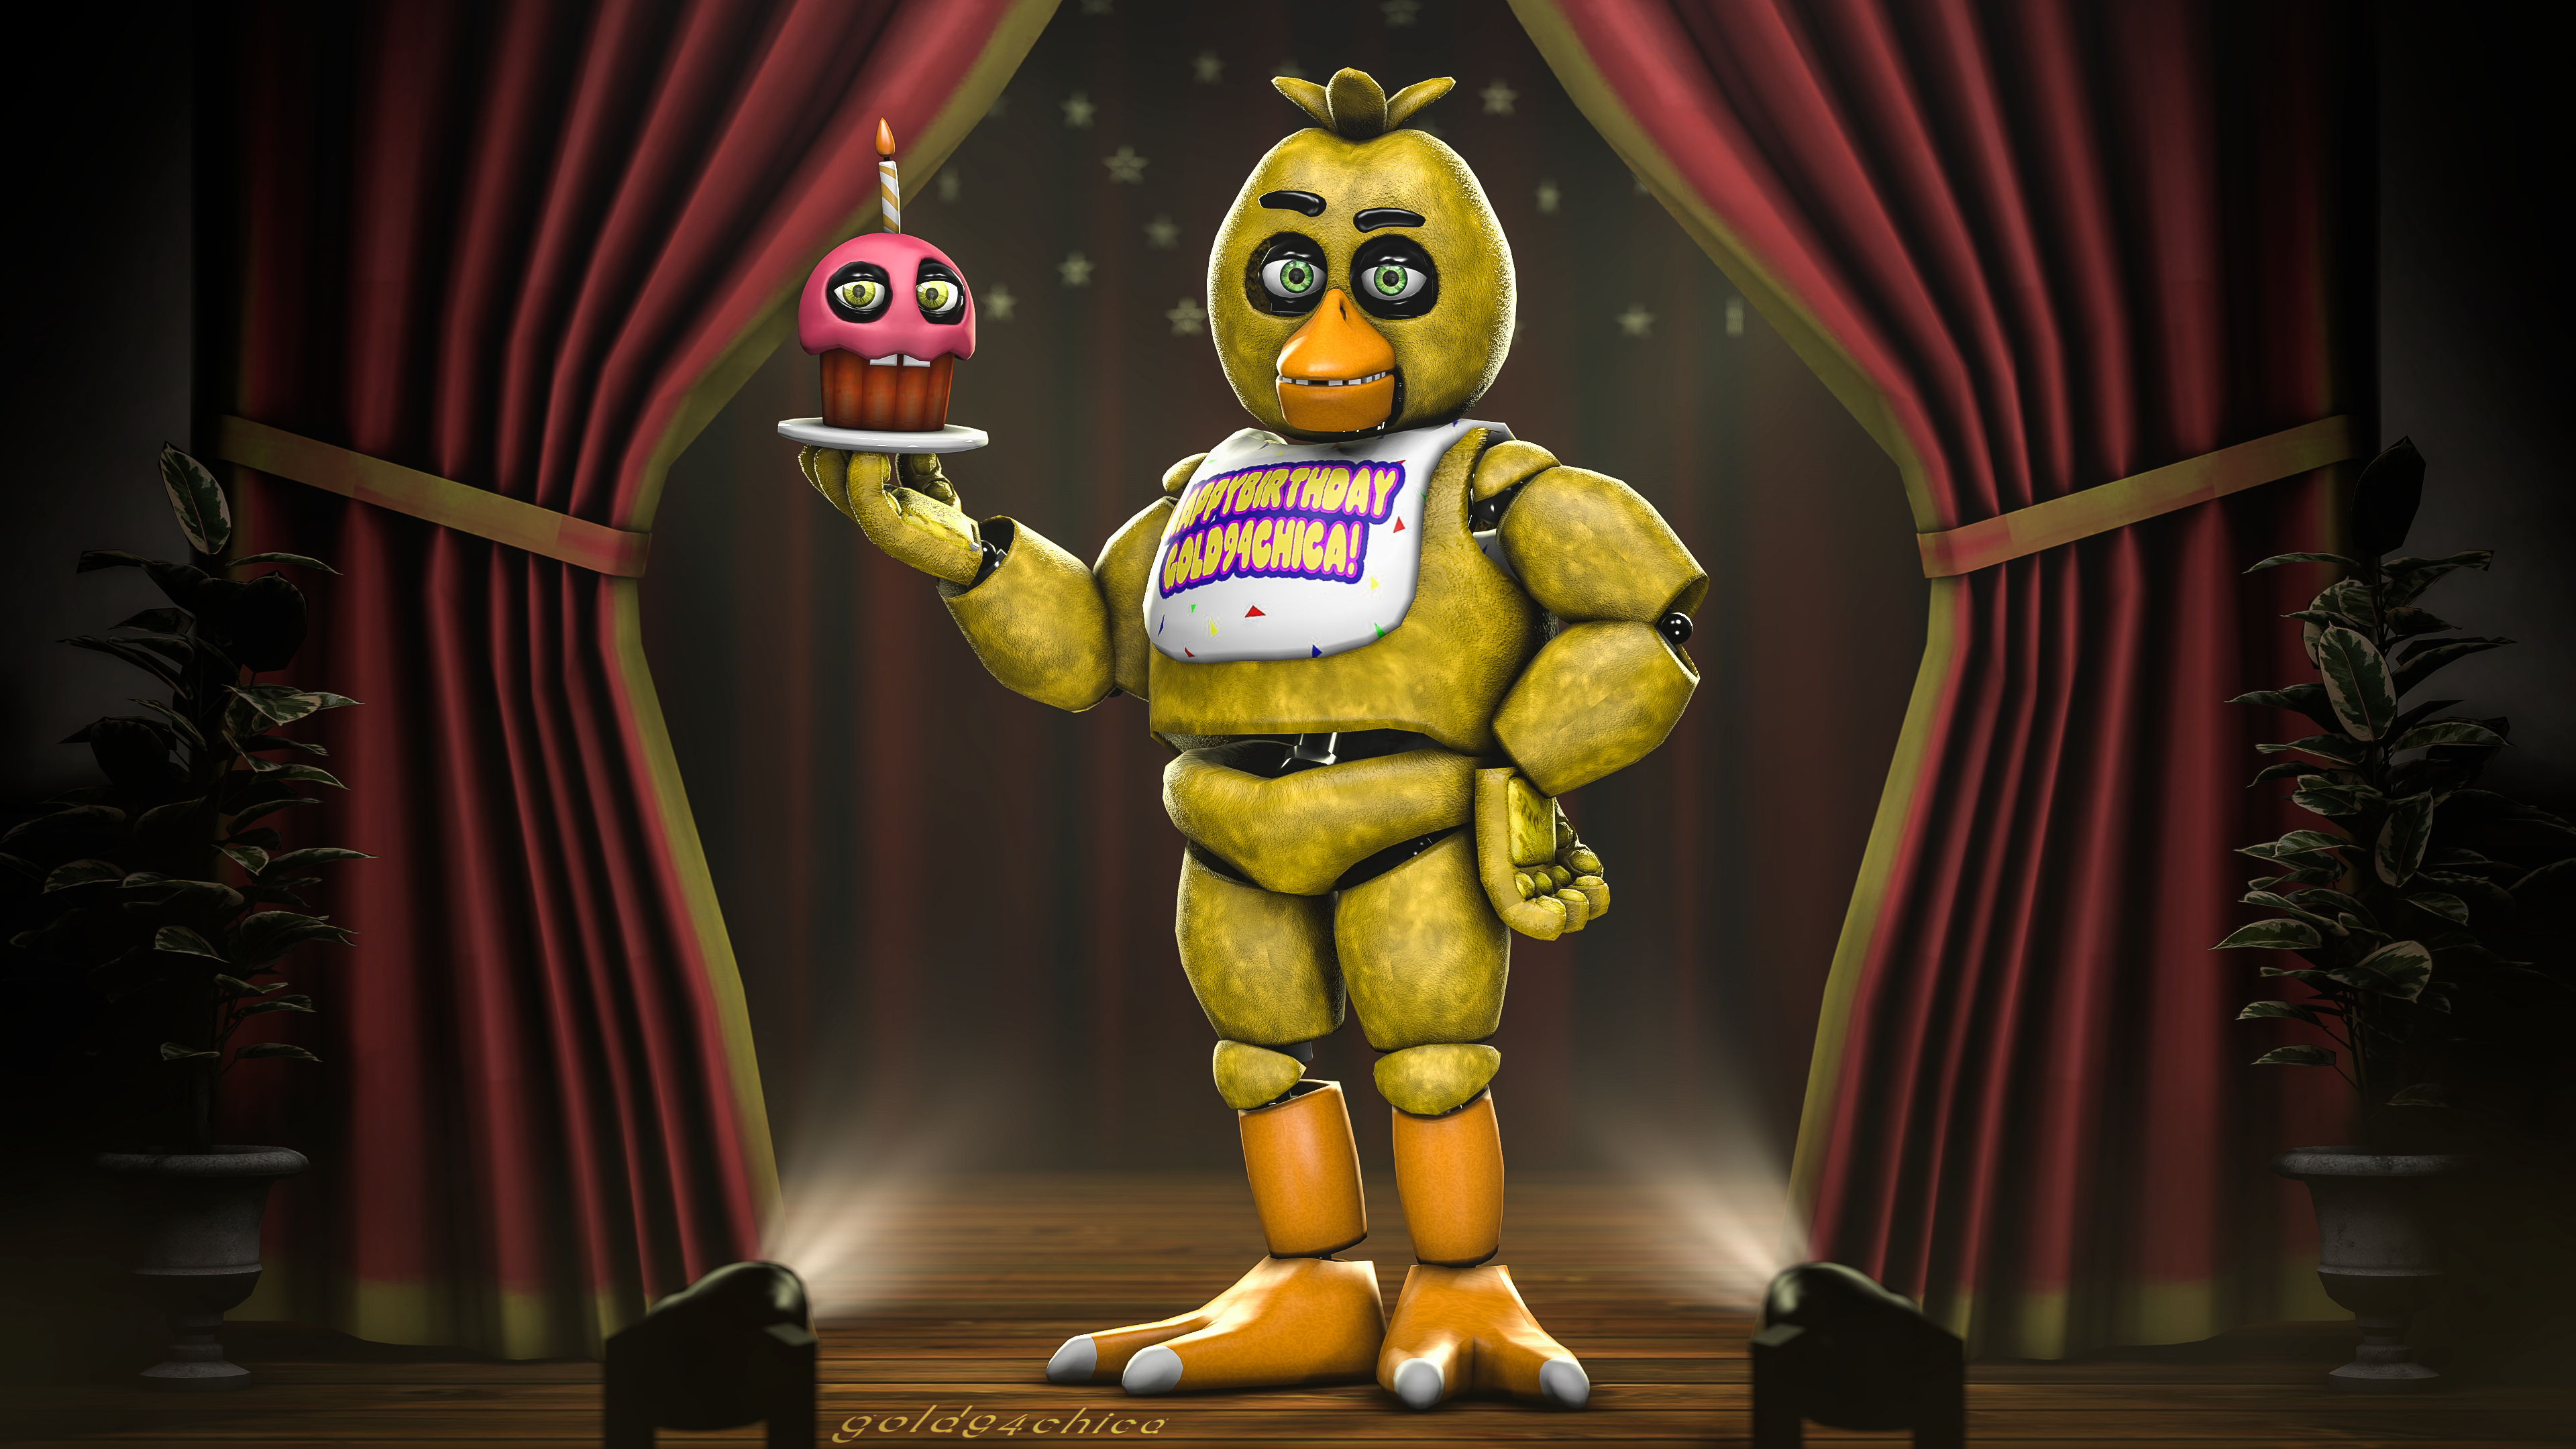 3840x2160 30+ Chica (Five NIghts at Freddy's) HD Wallpapers und Hintergr&Atilde;&frac14;nde